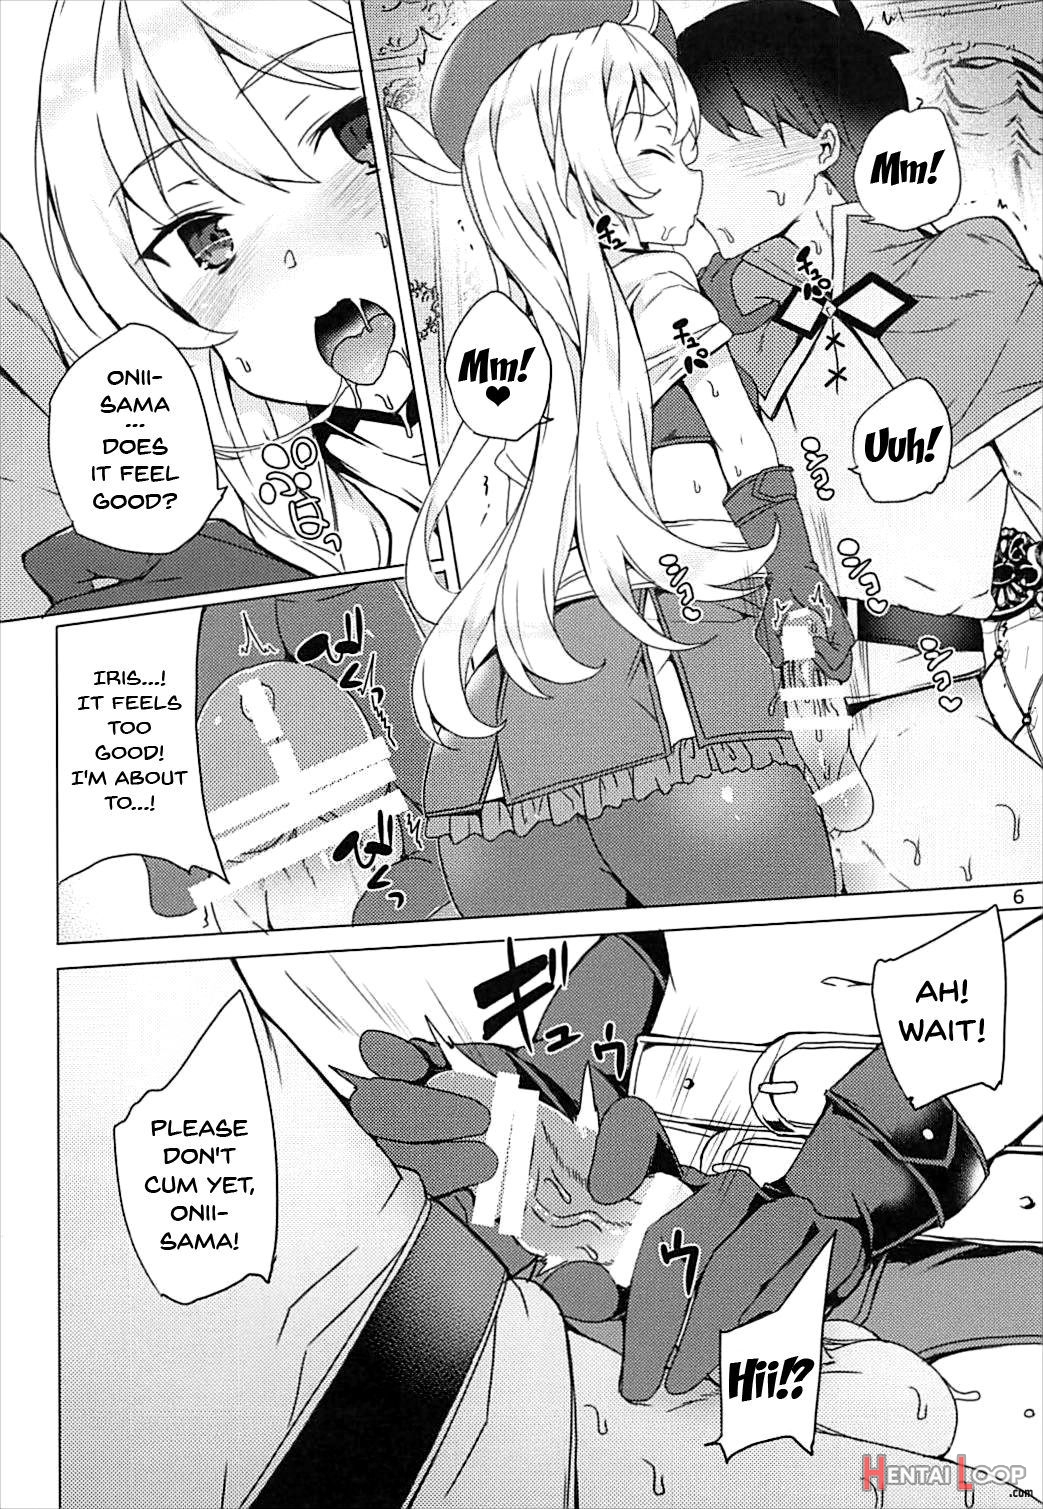 Over There! Megumin's Thief Group page 5